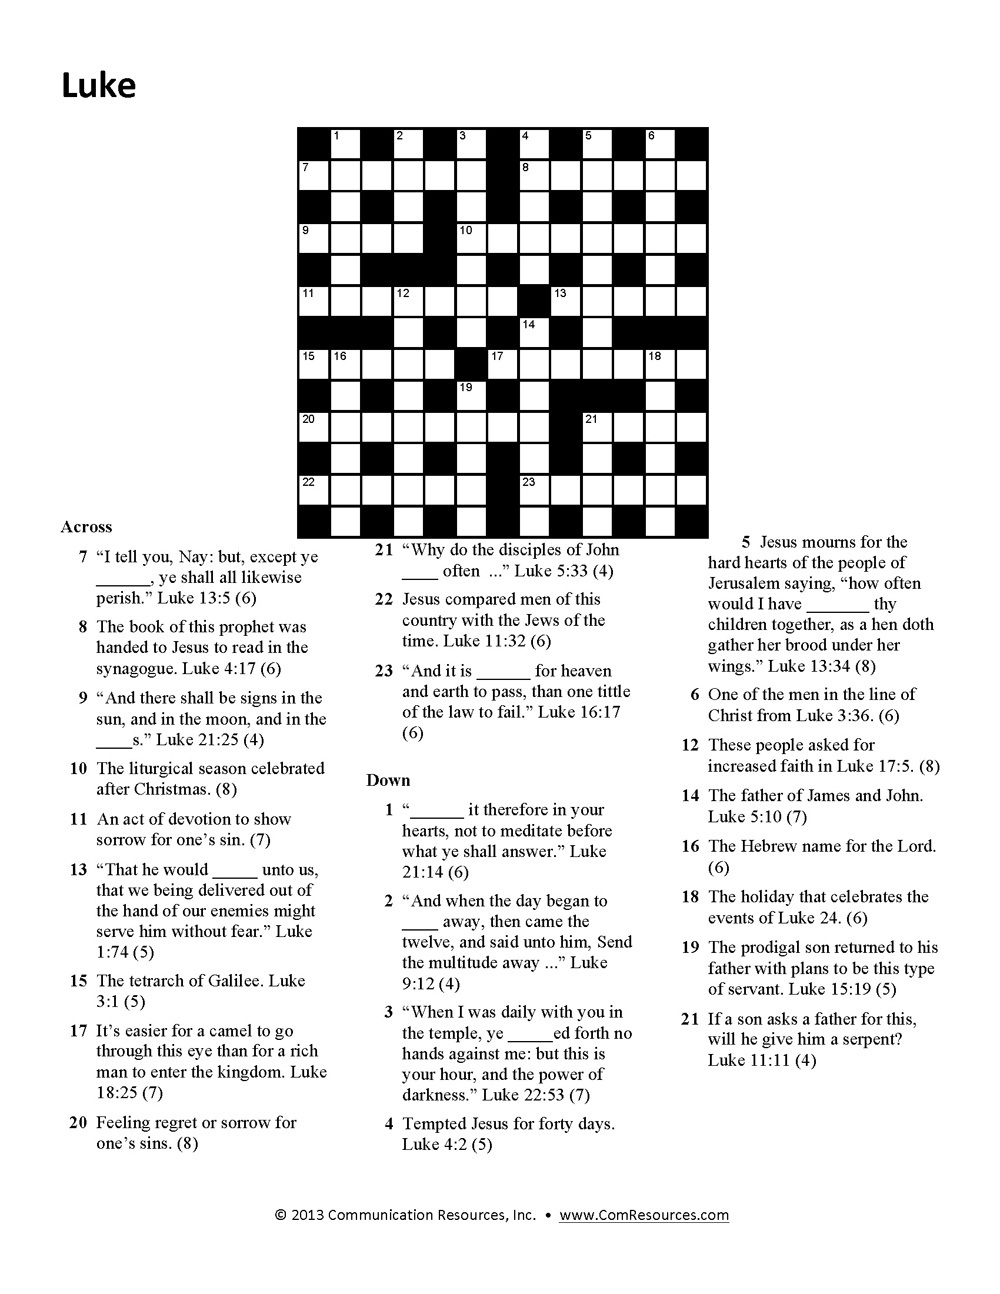 15 Fun Bible Crossword Puzzles | Kittybabylove - Printable Crossword Puzzles 2013